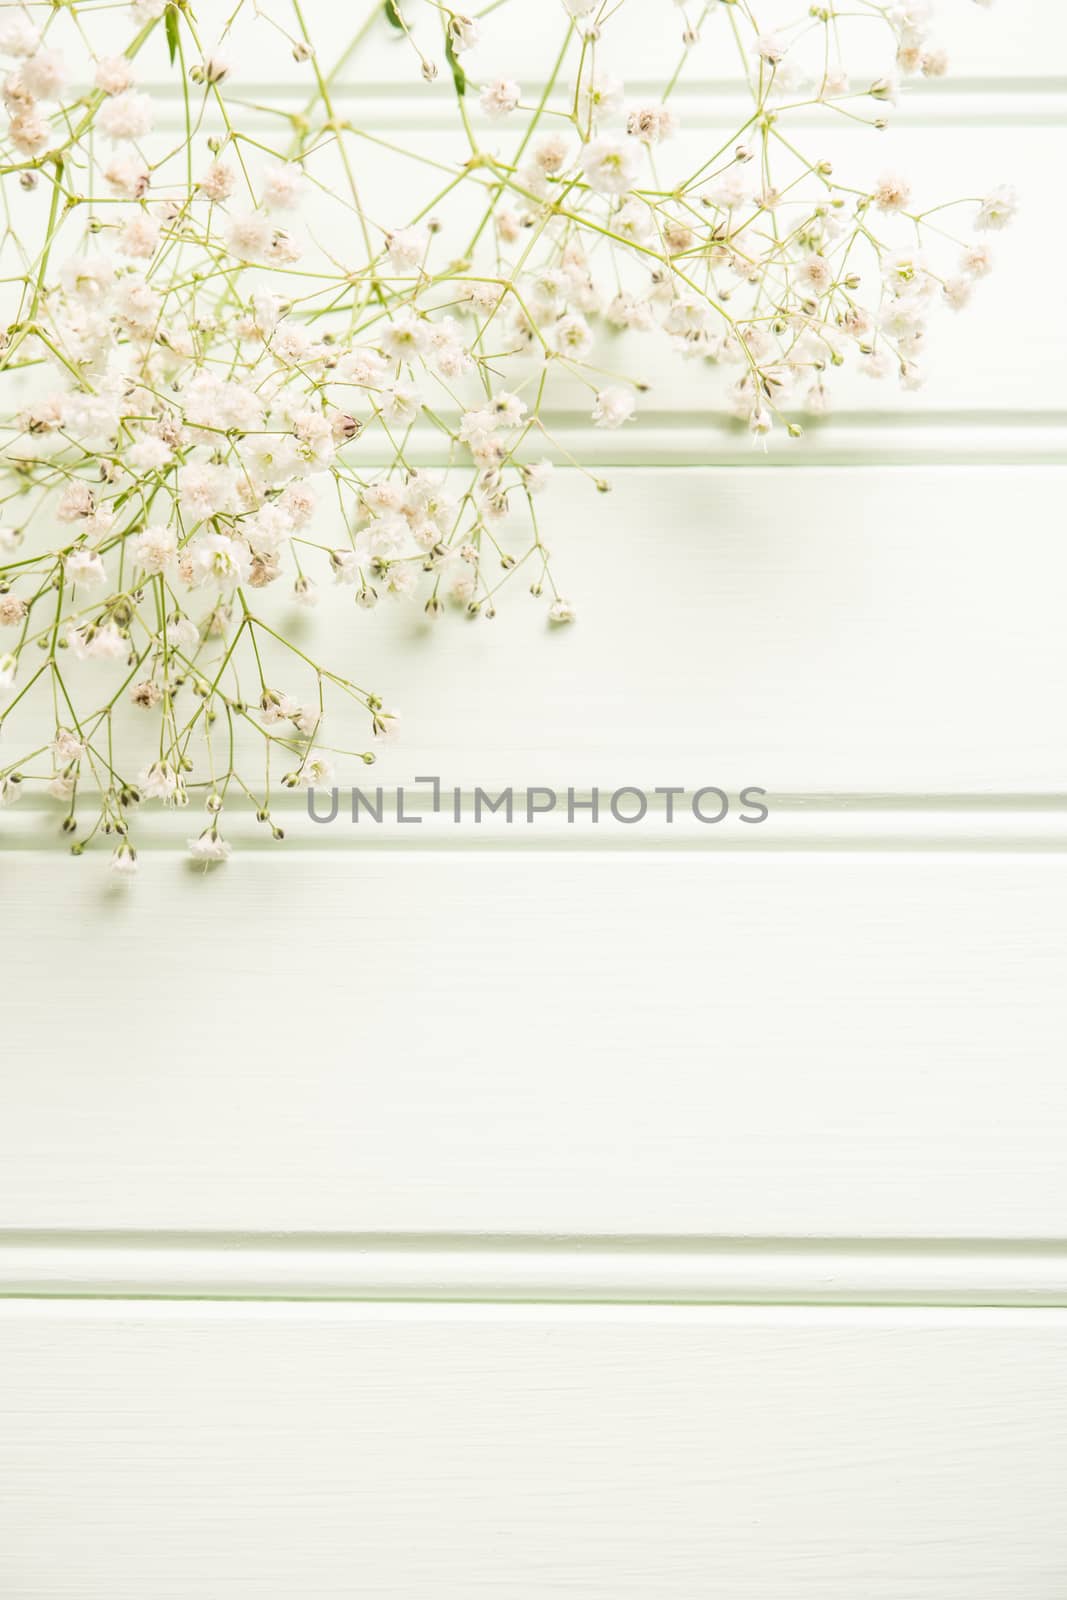 A bouquet of gypsophila flowers lay on the wooden table. Vintage style image. Copy space